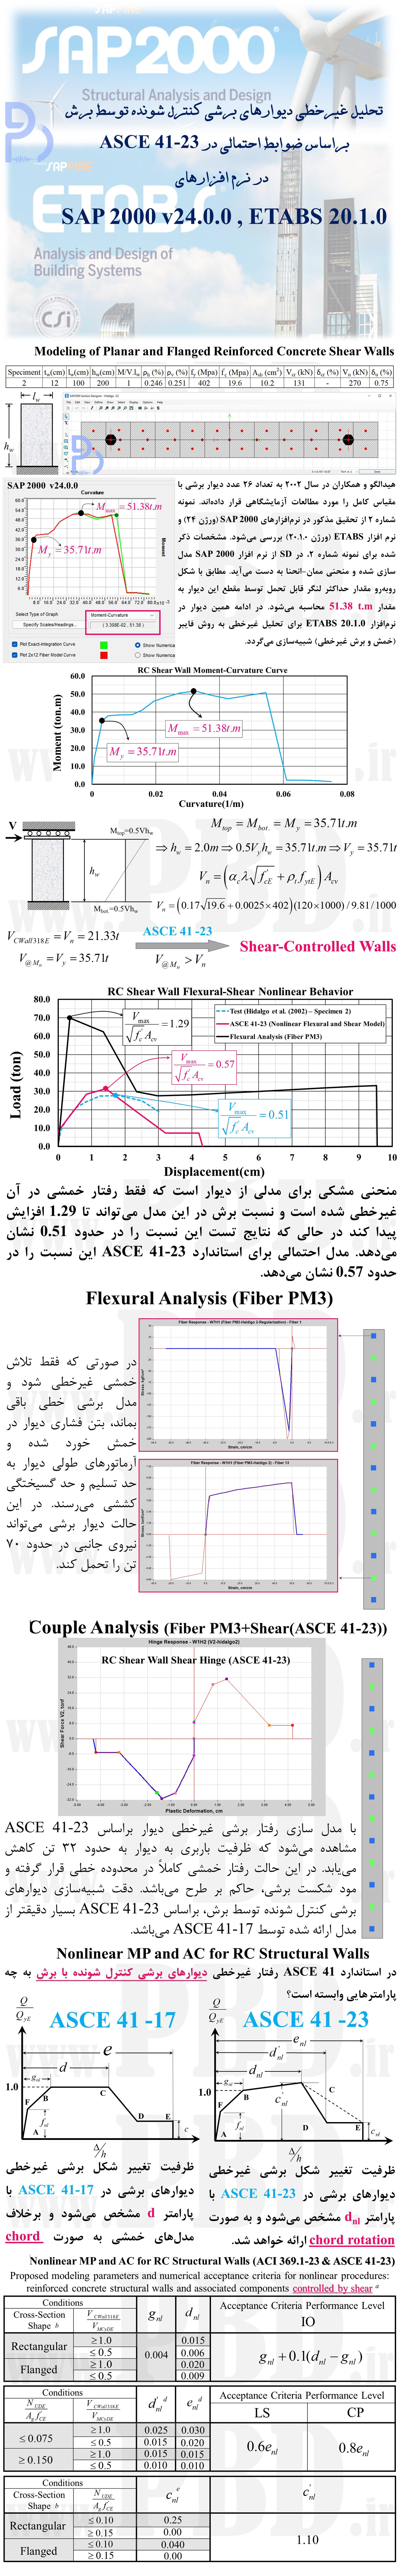  Nonlinear Fiber Model for RC Shear Wall According to ASCE 41-23